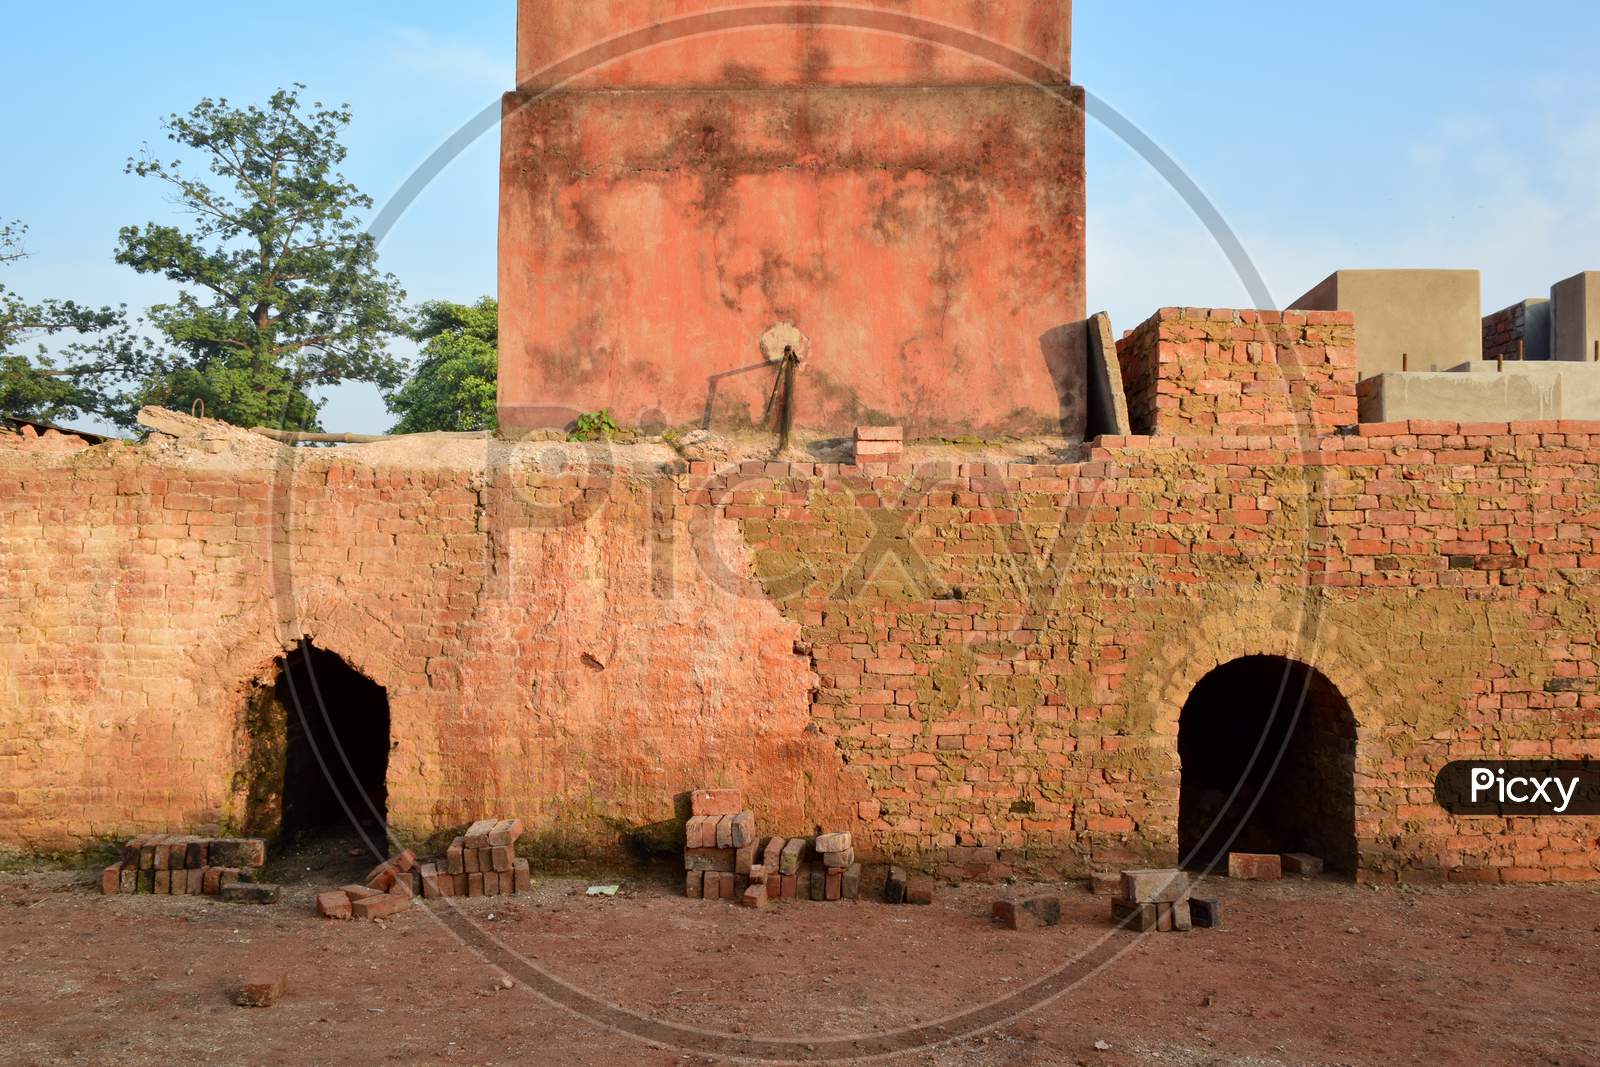 Close-up image of fireplace in an old brick factory in rural Bengal